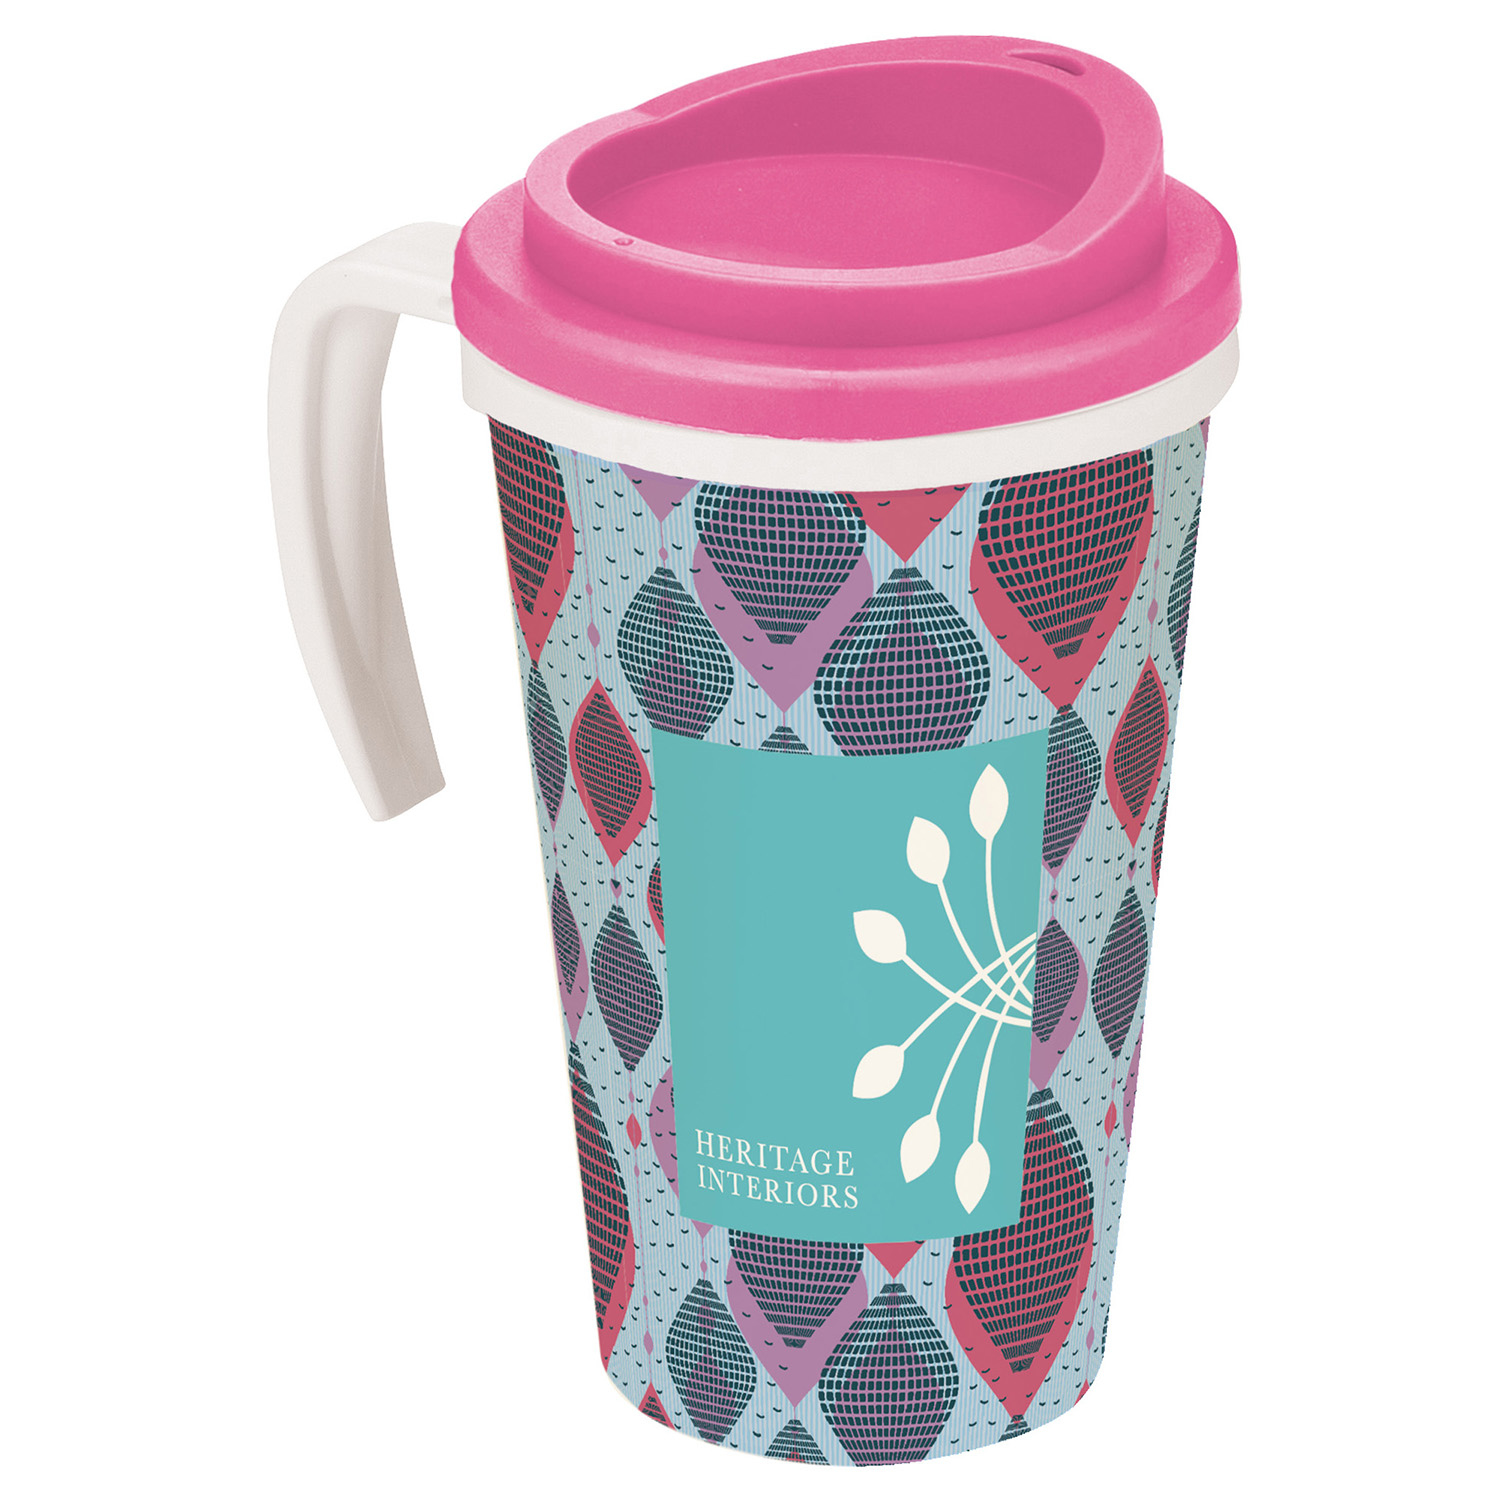 Grande Thermal Mug showing full colour print with pink lid